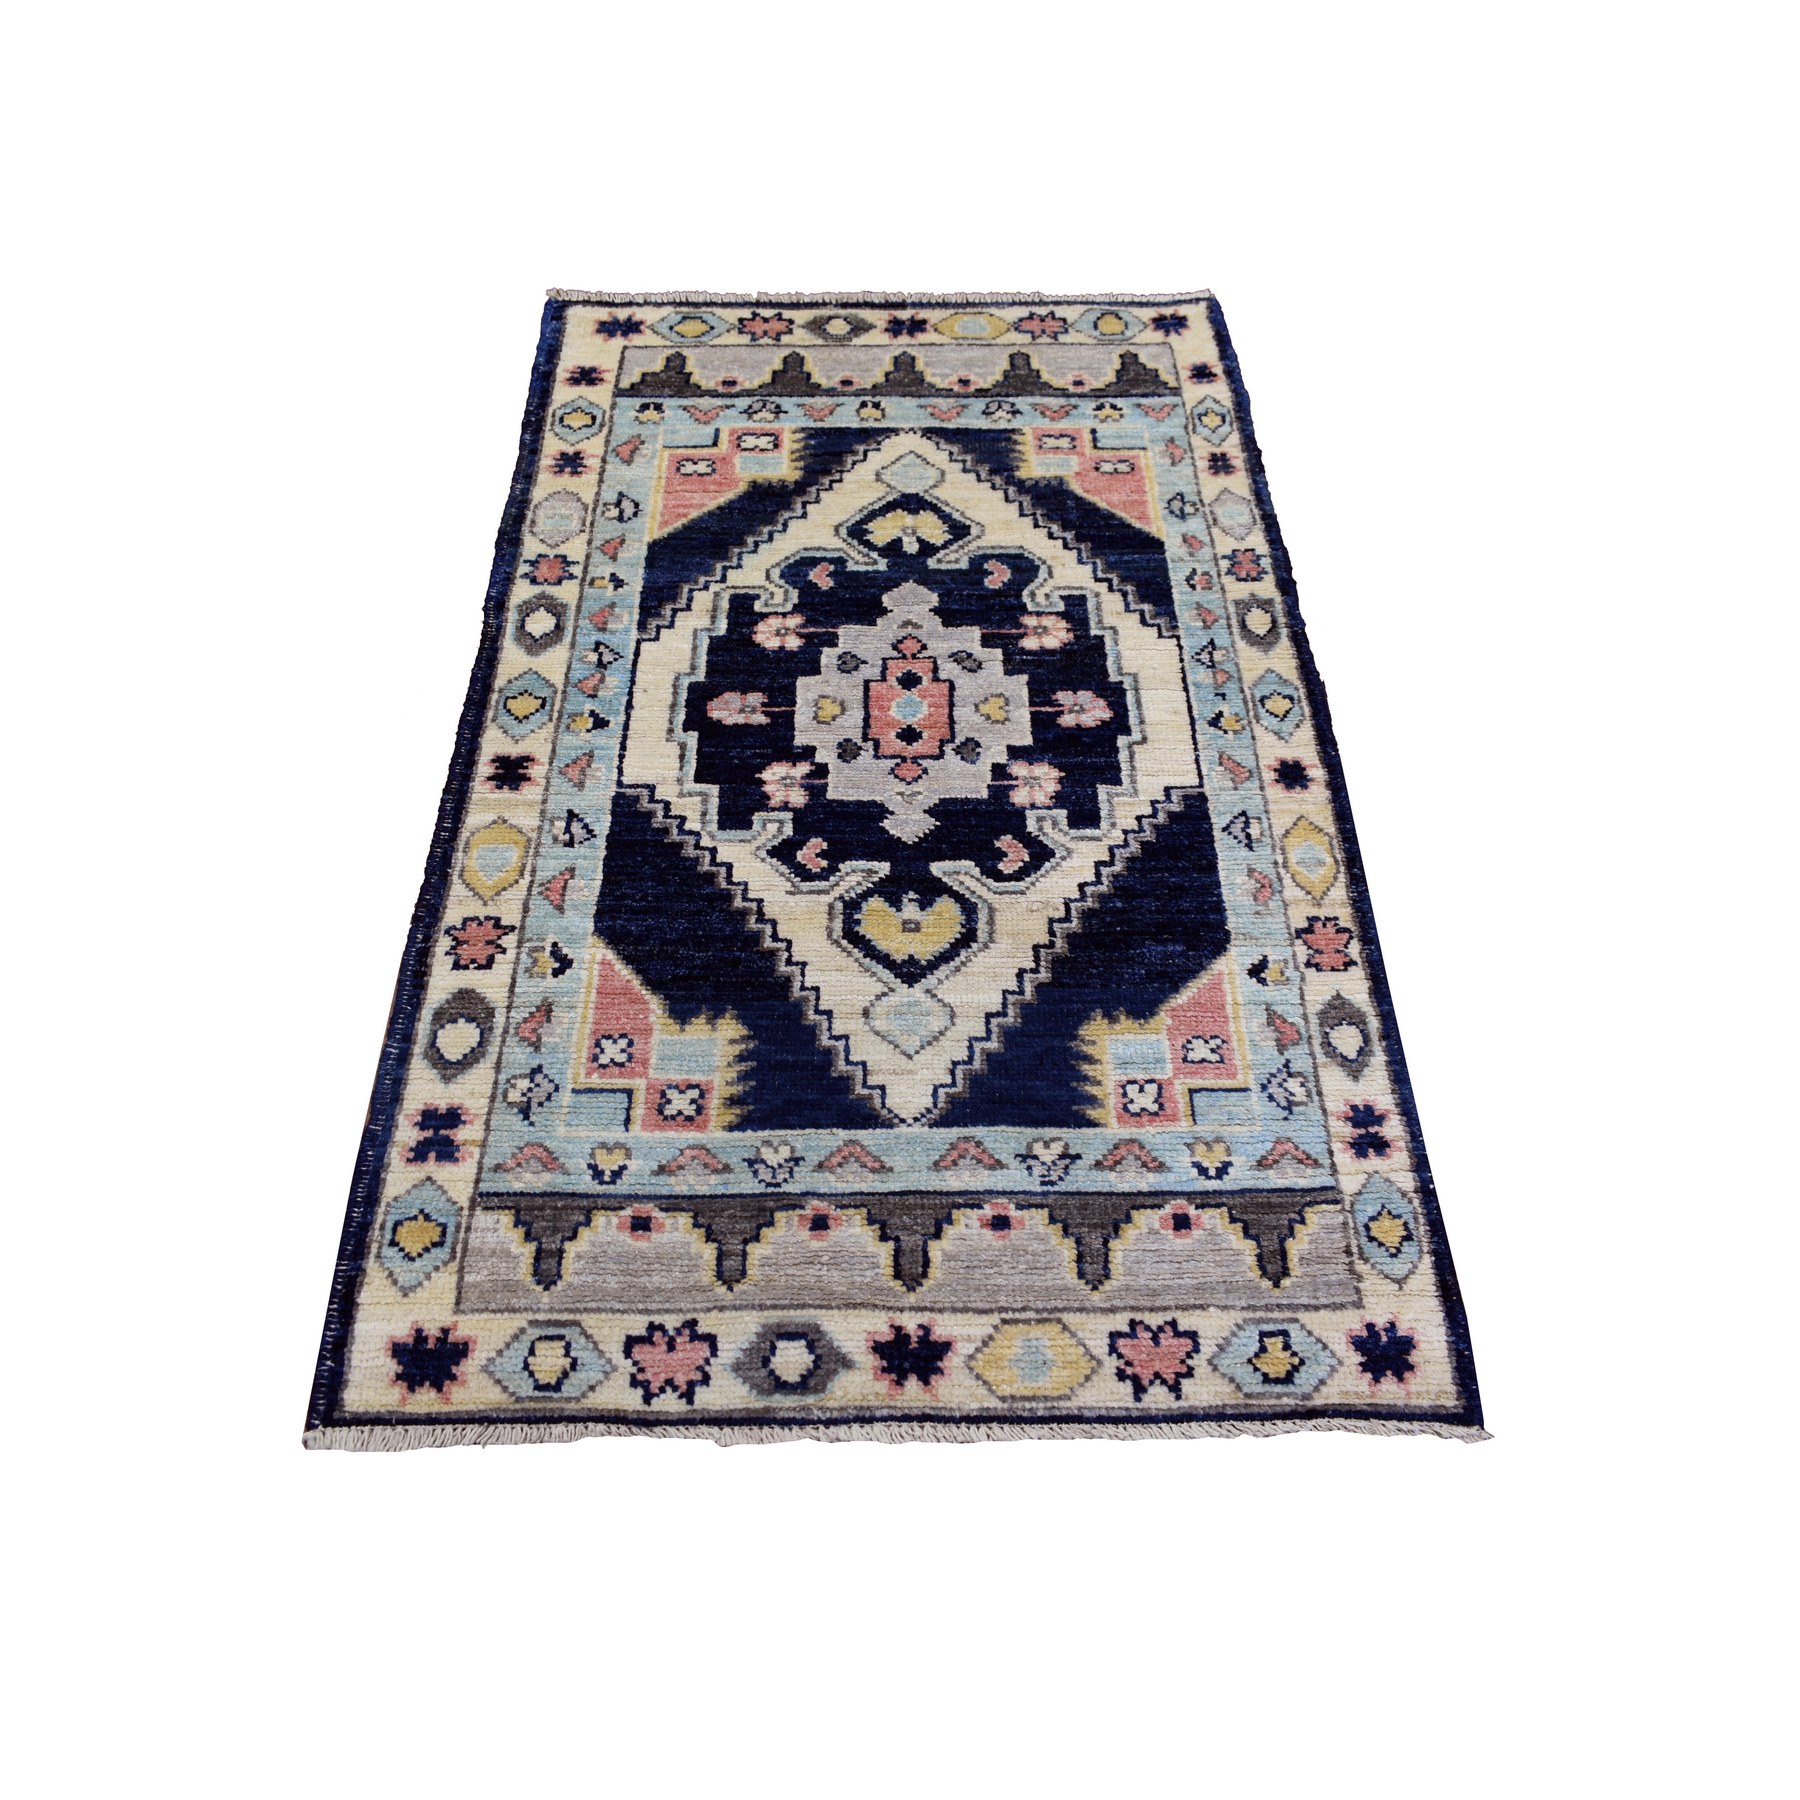 3'2"x5'2" Midnight Blue, Pure Wool Hand Woven, Anatolian Village Inspired with Geometric Pattern Natural Dyes, Oriental Rug 